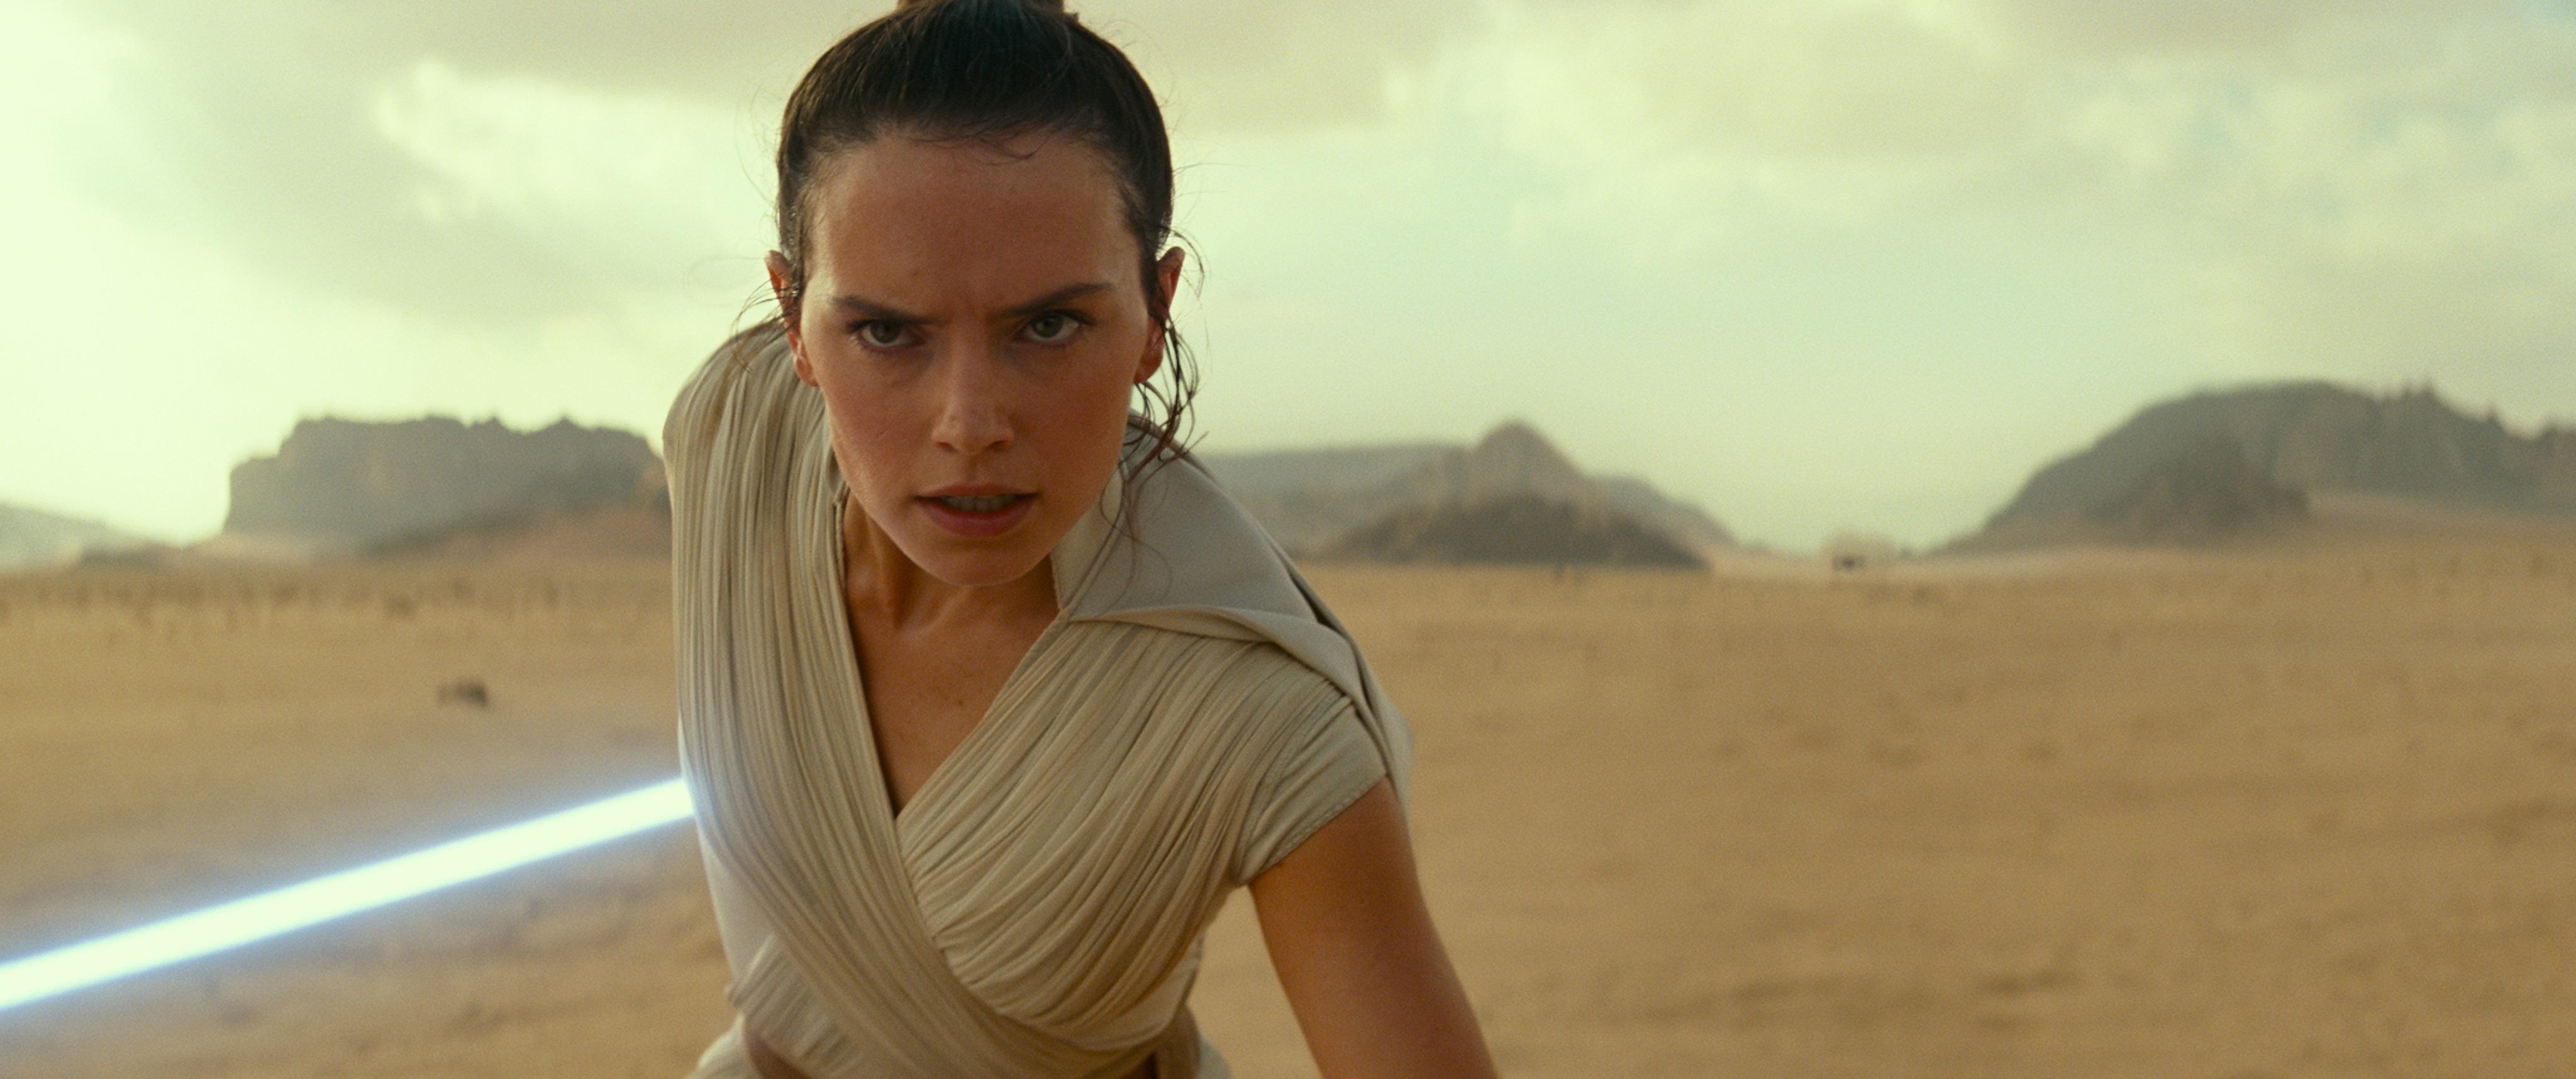 Star Wars: The Rise of Skywalker trailer: what you might've missed